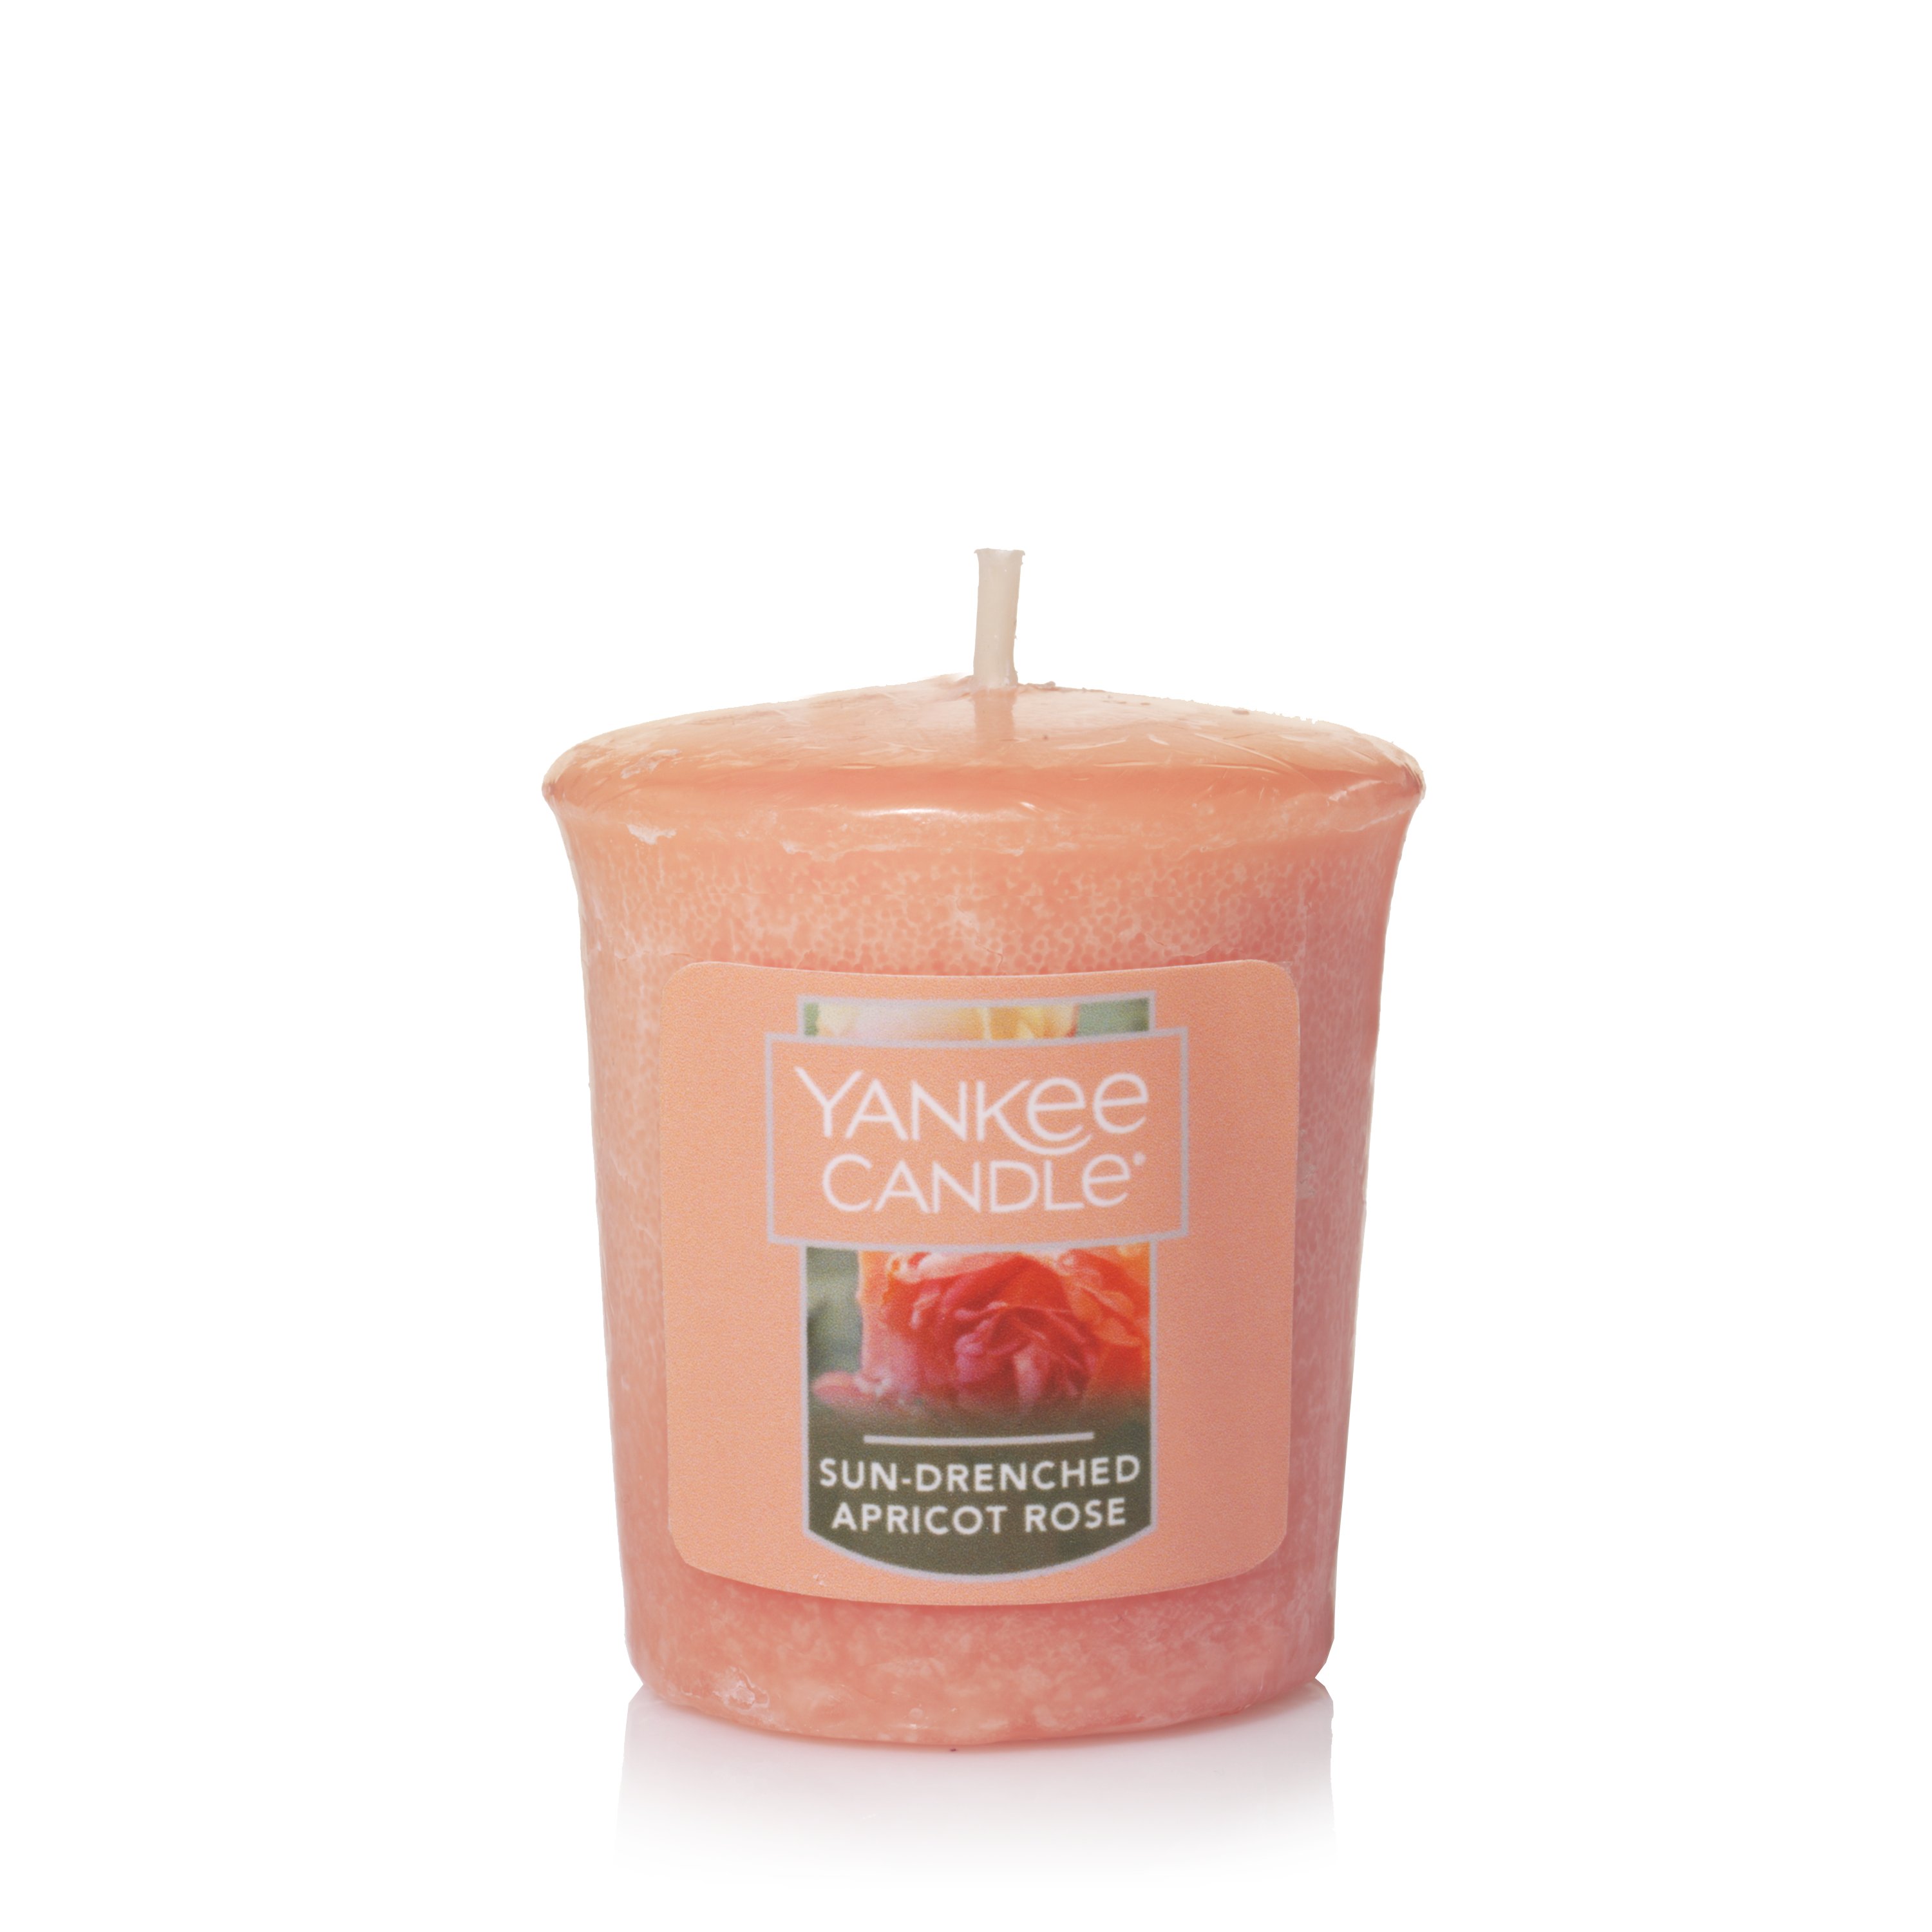 SPRING SPECIAL YANKEE CANDLE SET 4 VOTIVE CANDLES SUNDRENCHED APRICOT ROSE 